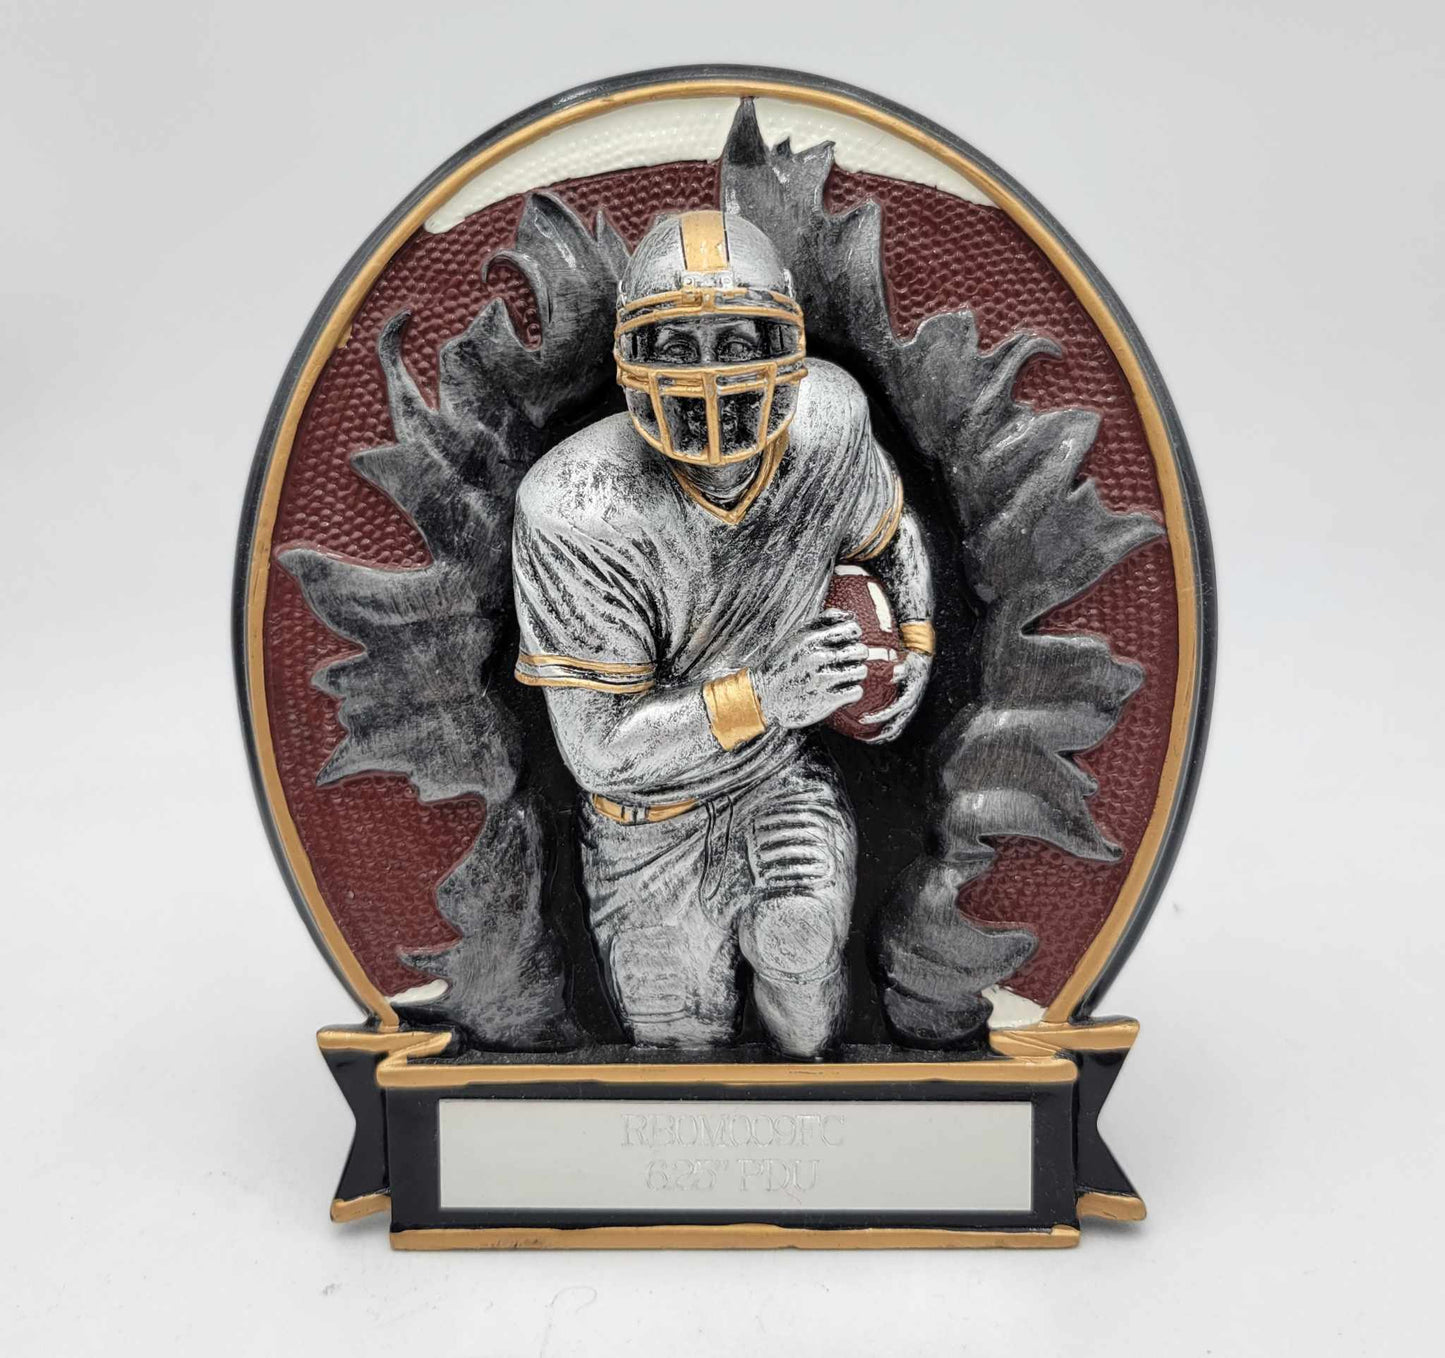 6.25" Break Out Player Football Trophy